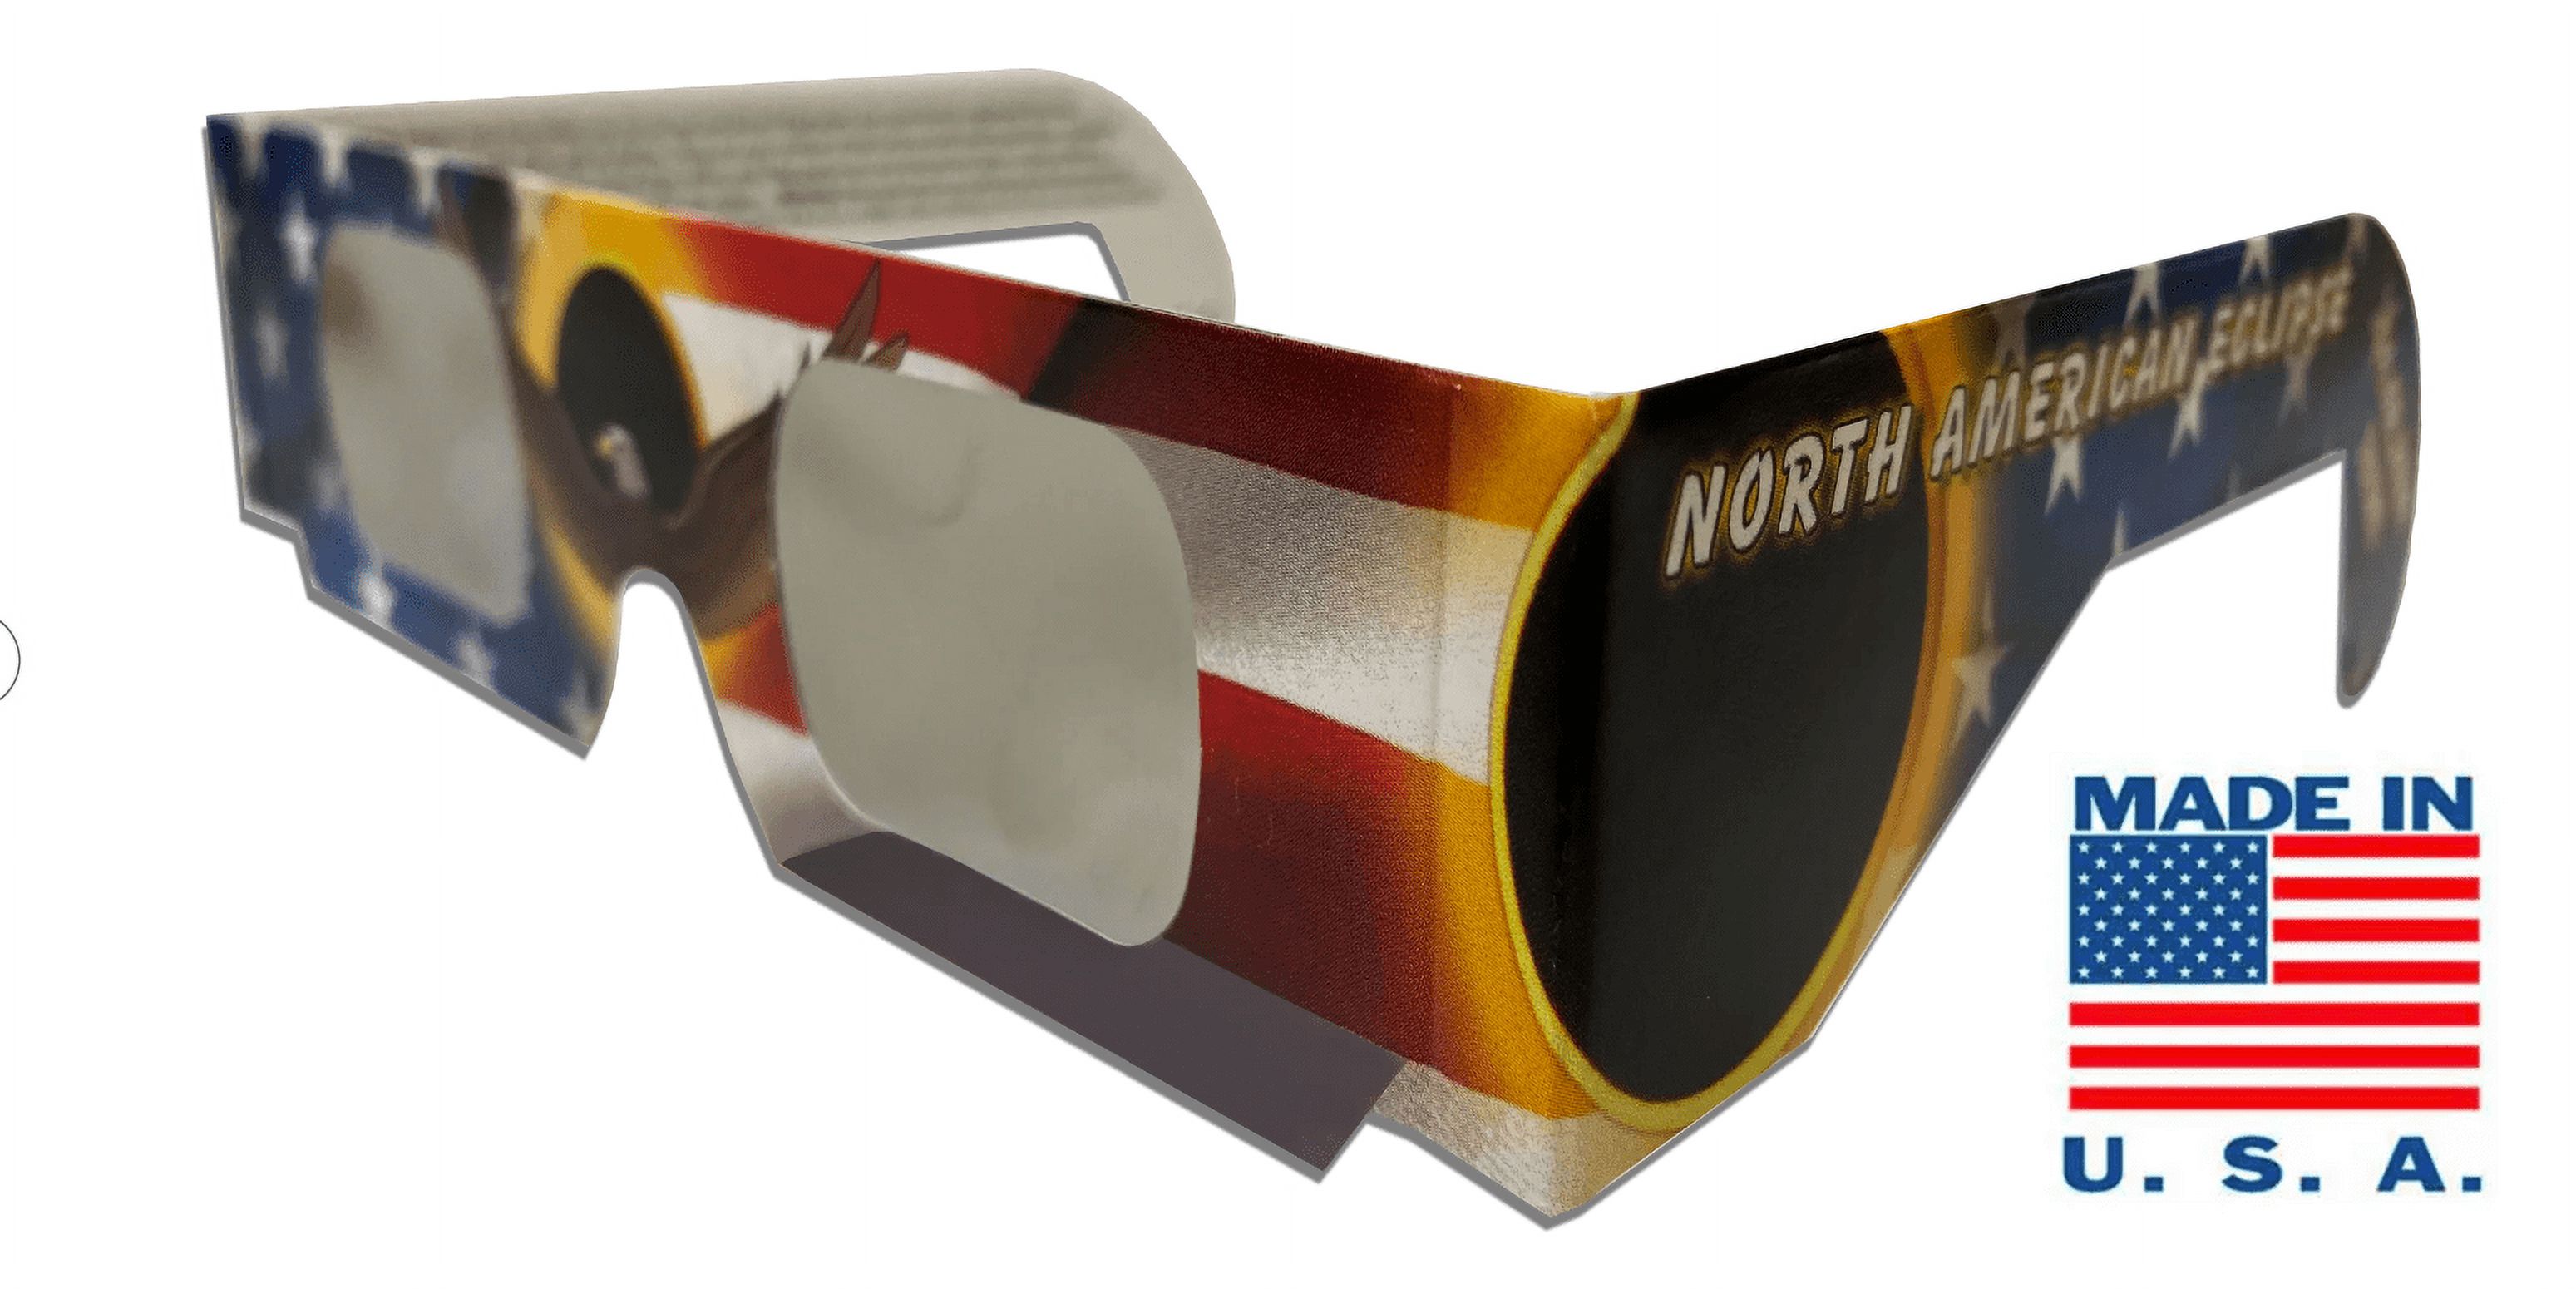 Solar Eclipse Glasses - $0.10 (In-Store Purchase Only)